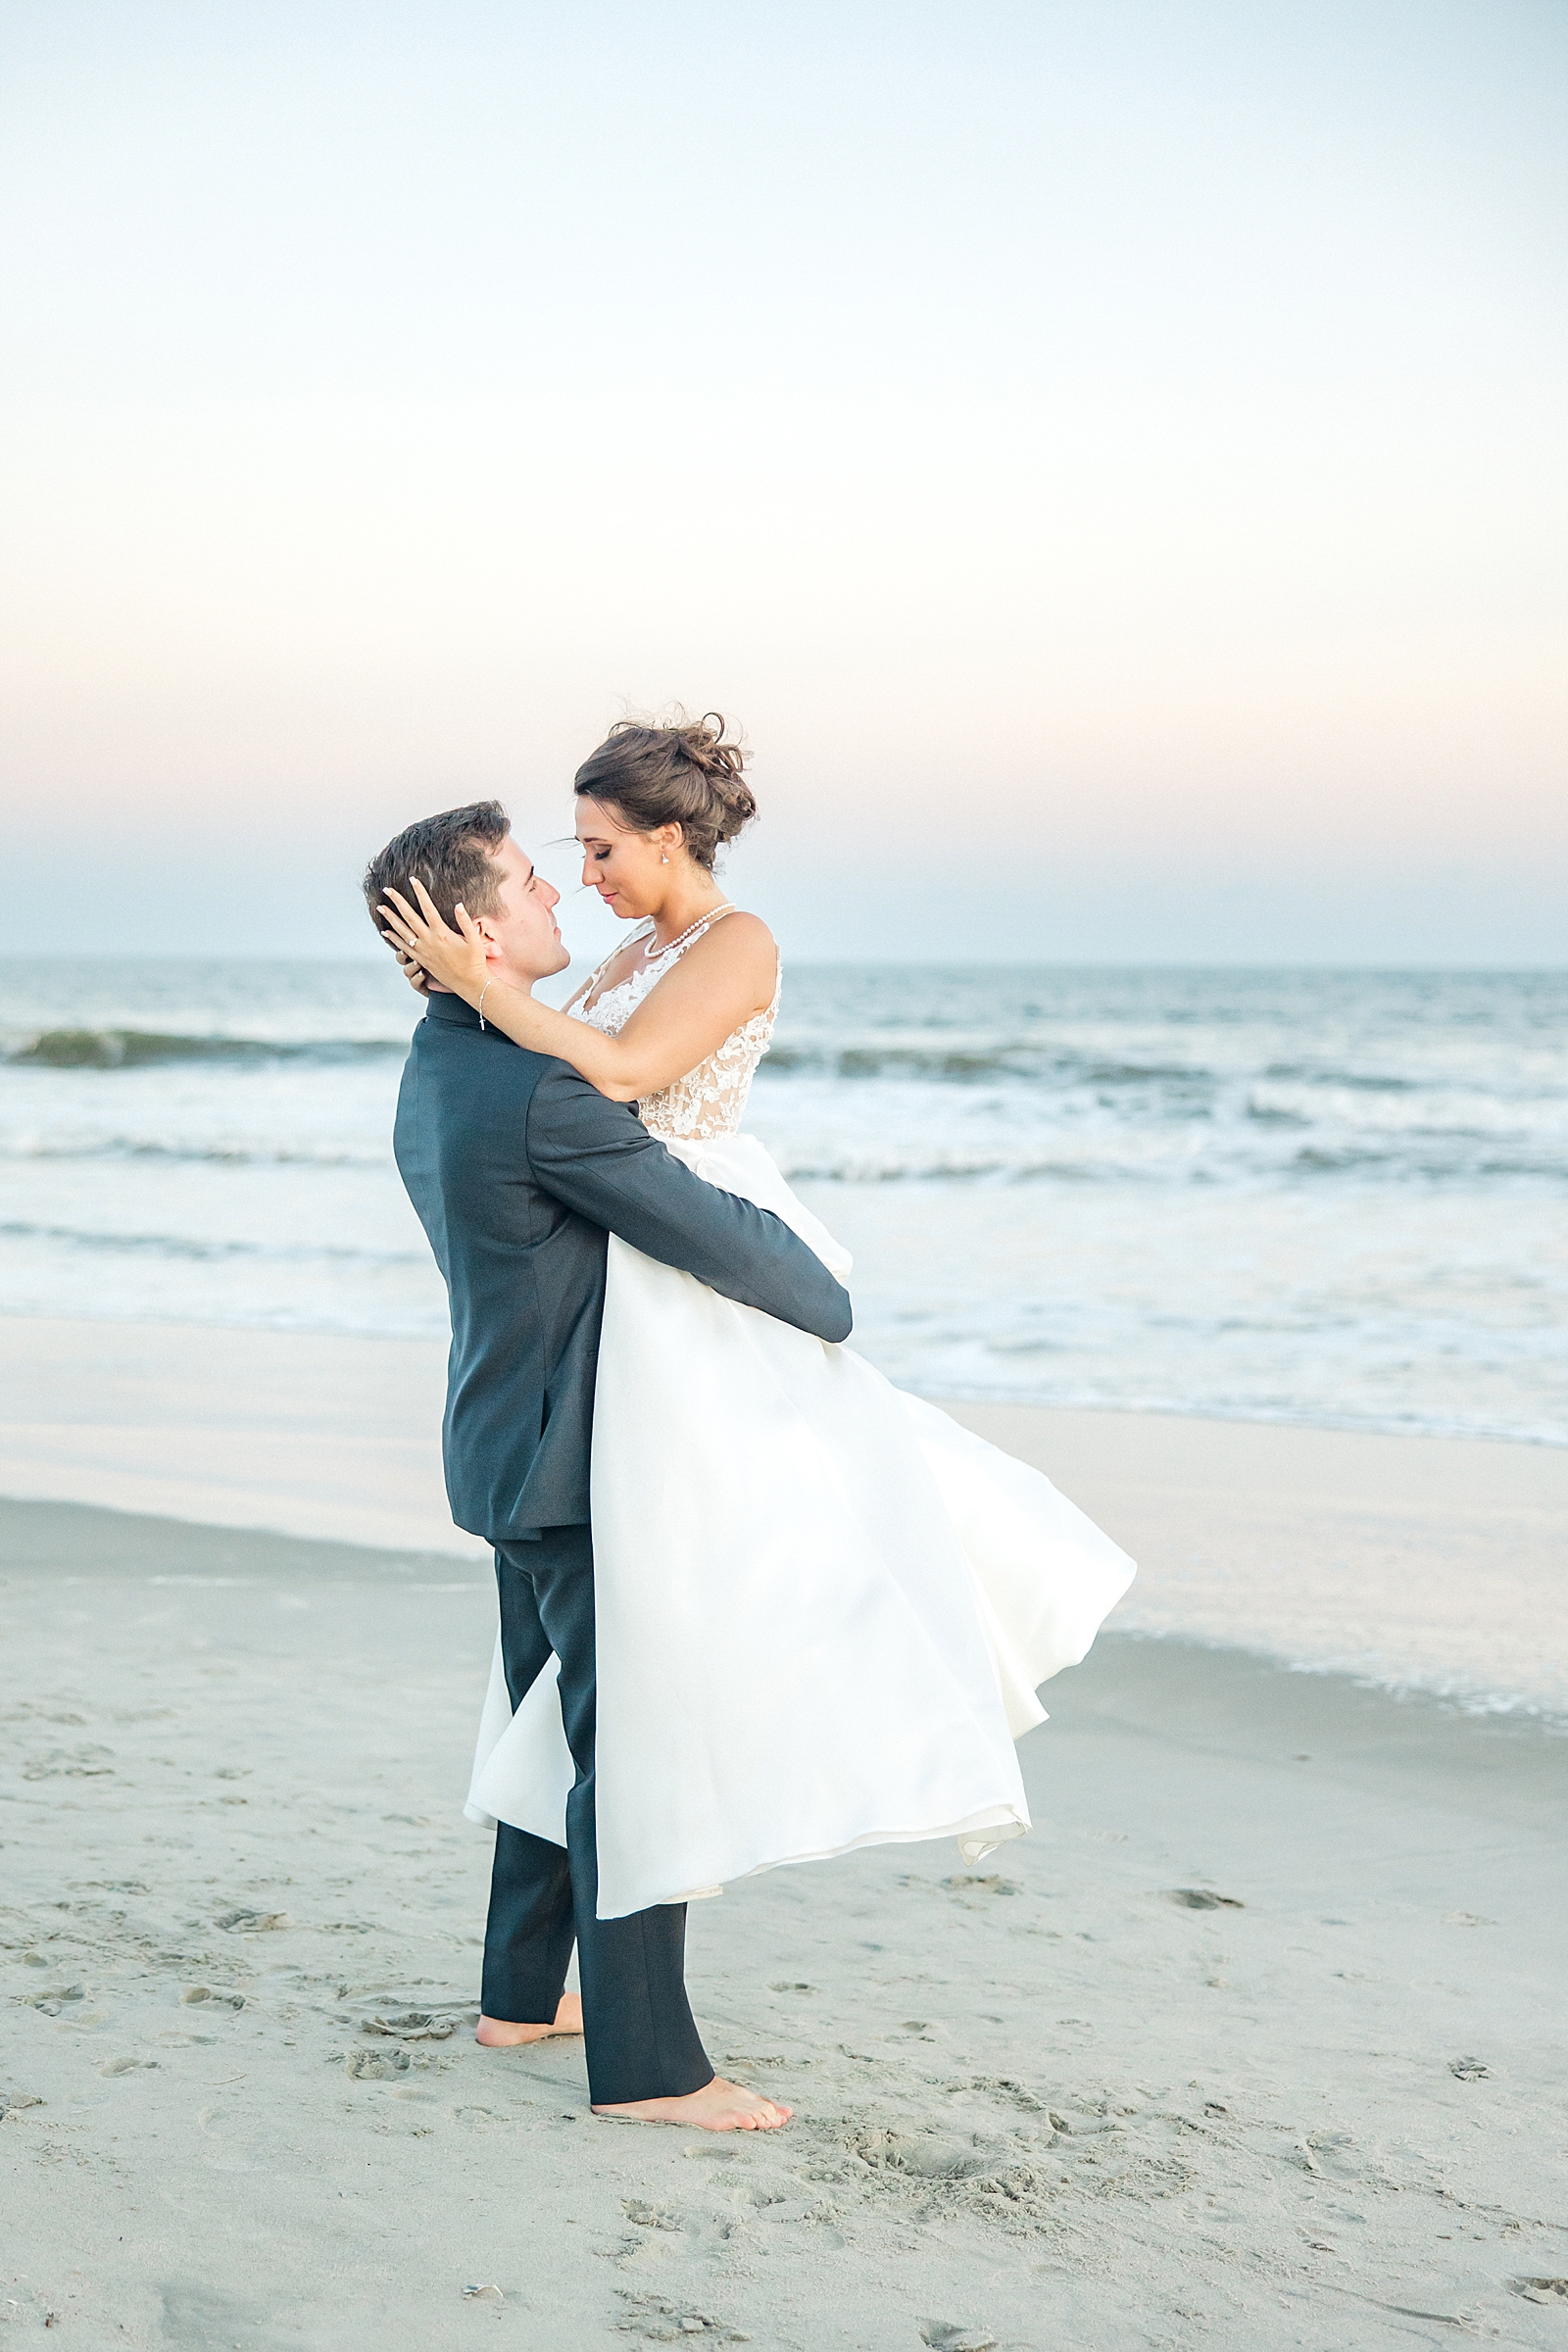 husband lifts his bride up on the beach